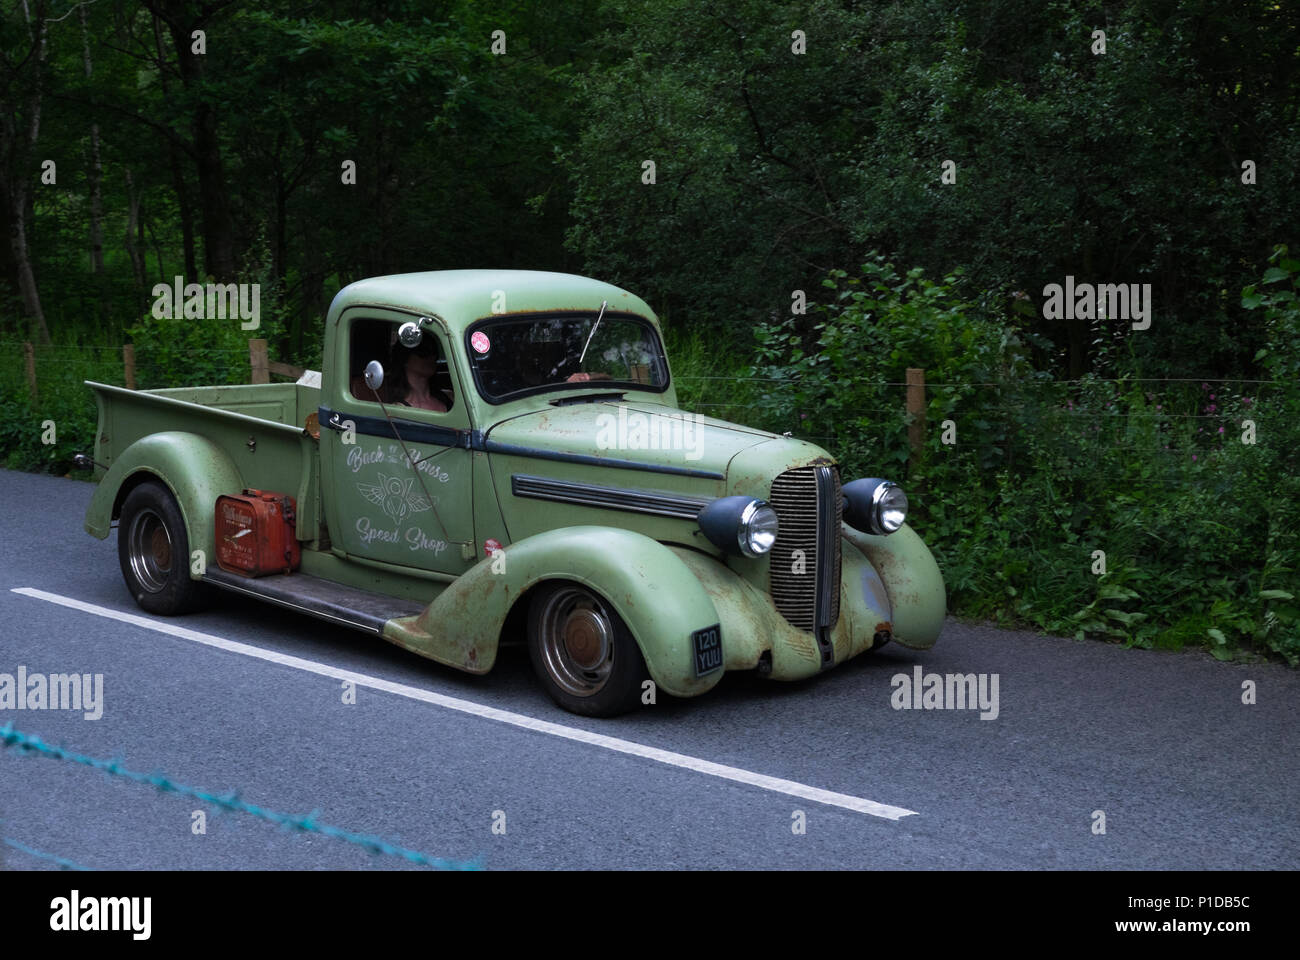 Green vintage pick up truck Stock Photo